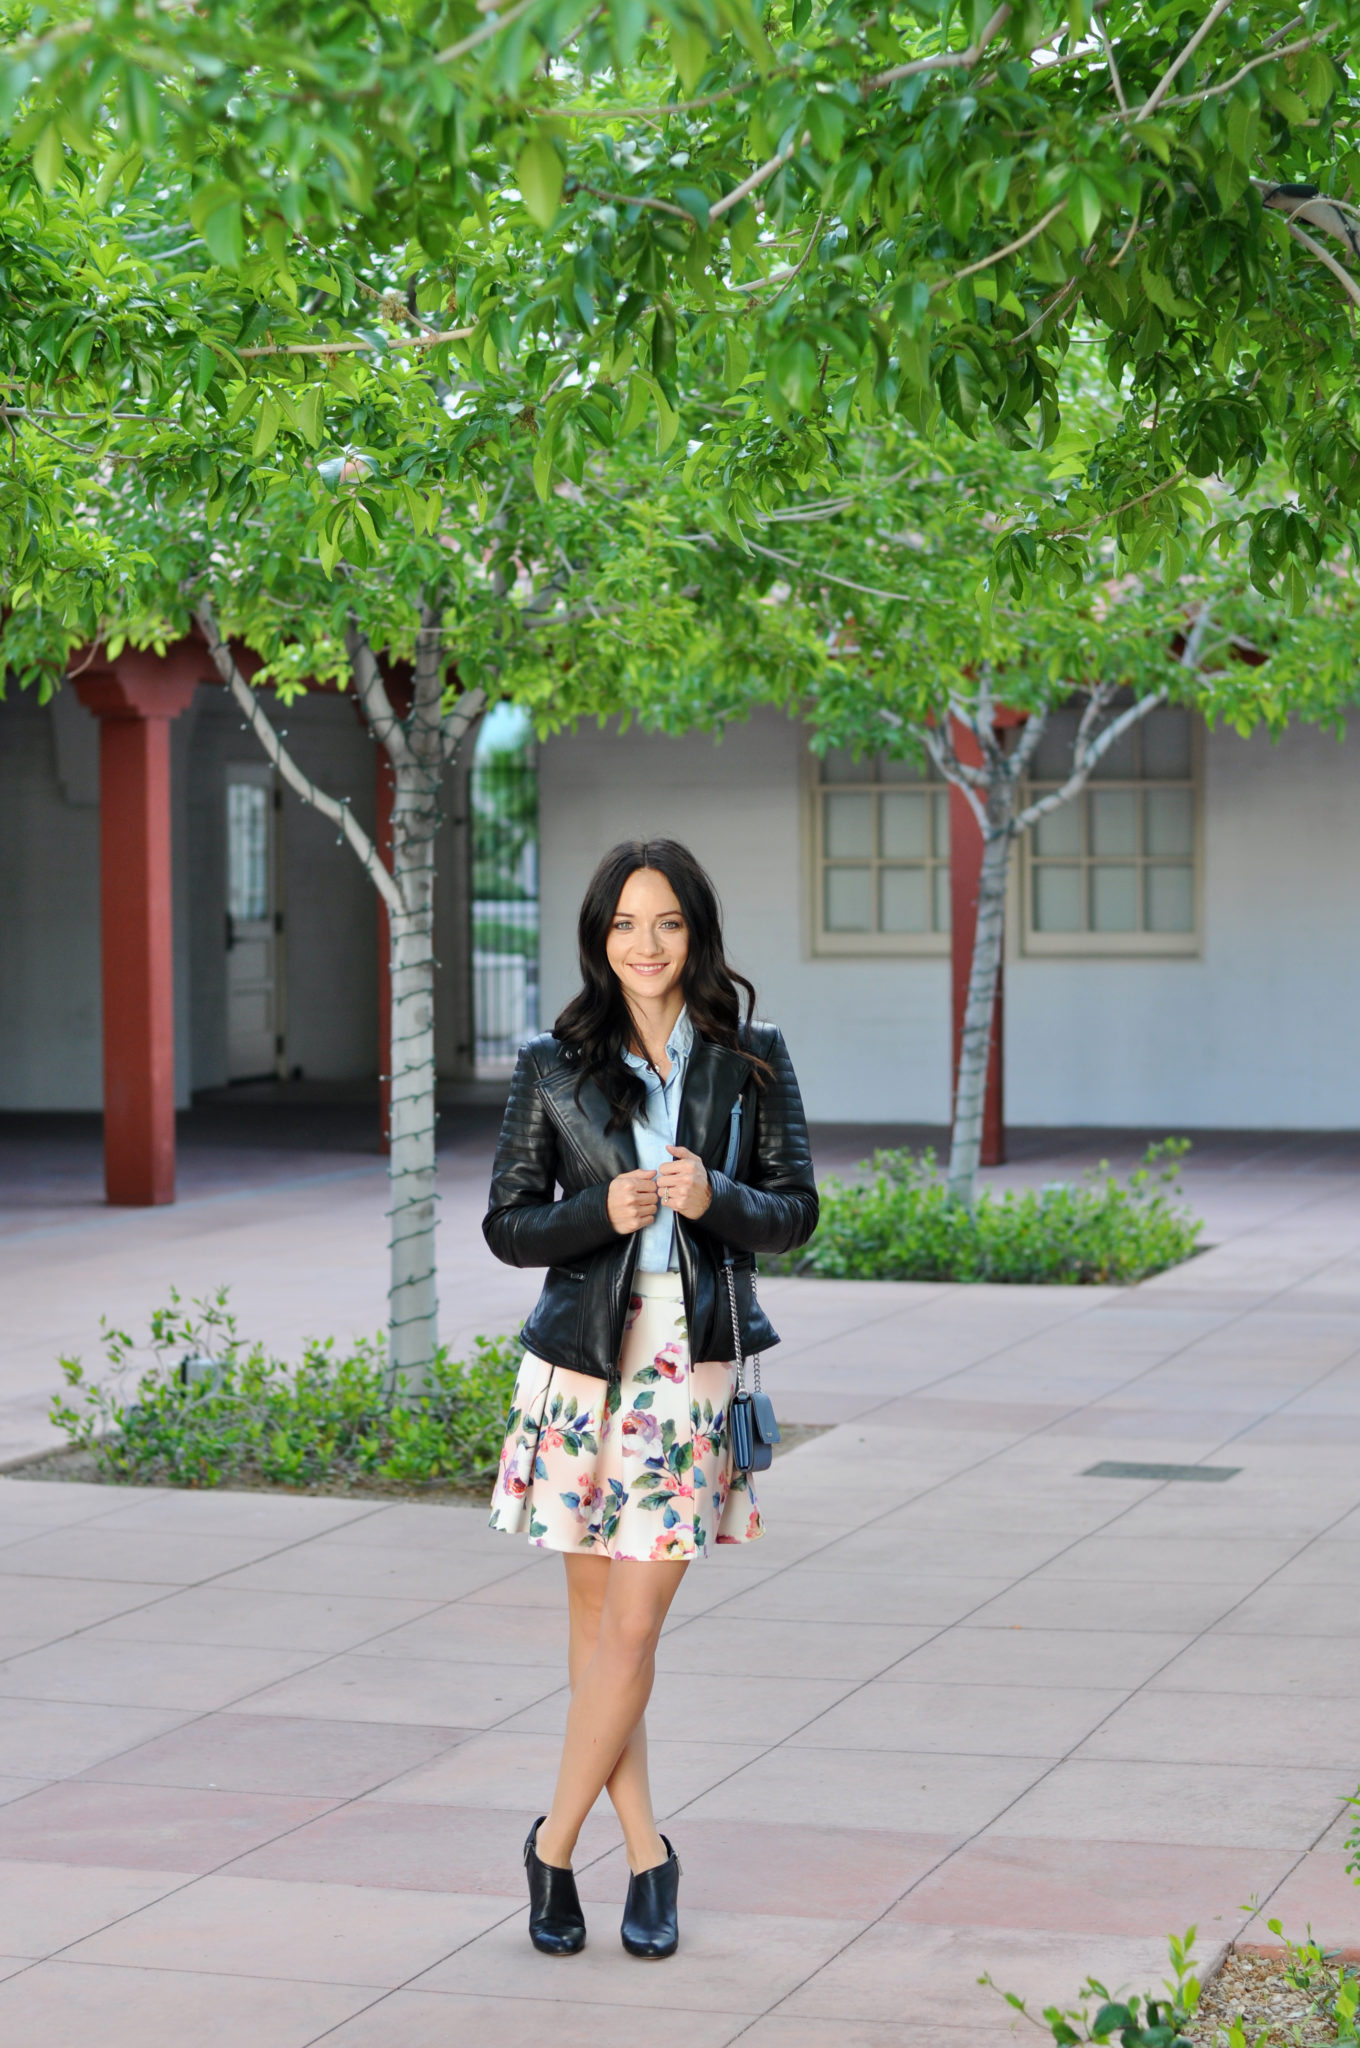 Spring Leather Jacket featured by top US fashion blog Outfits & Outings; Image of a woman wearing Wilsons Leather jacket and floral skirt.